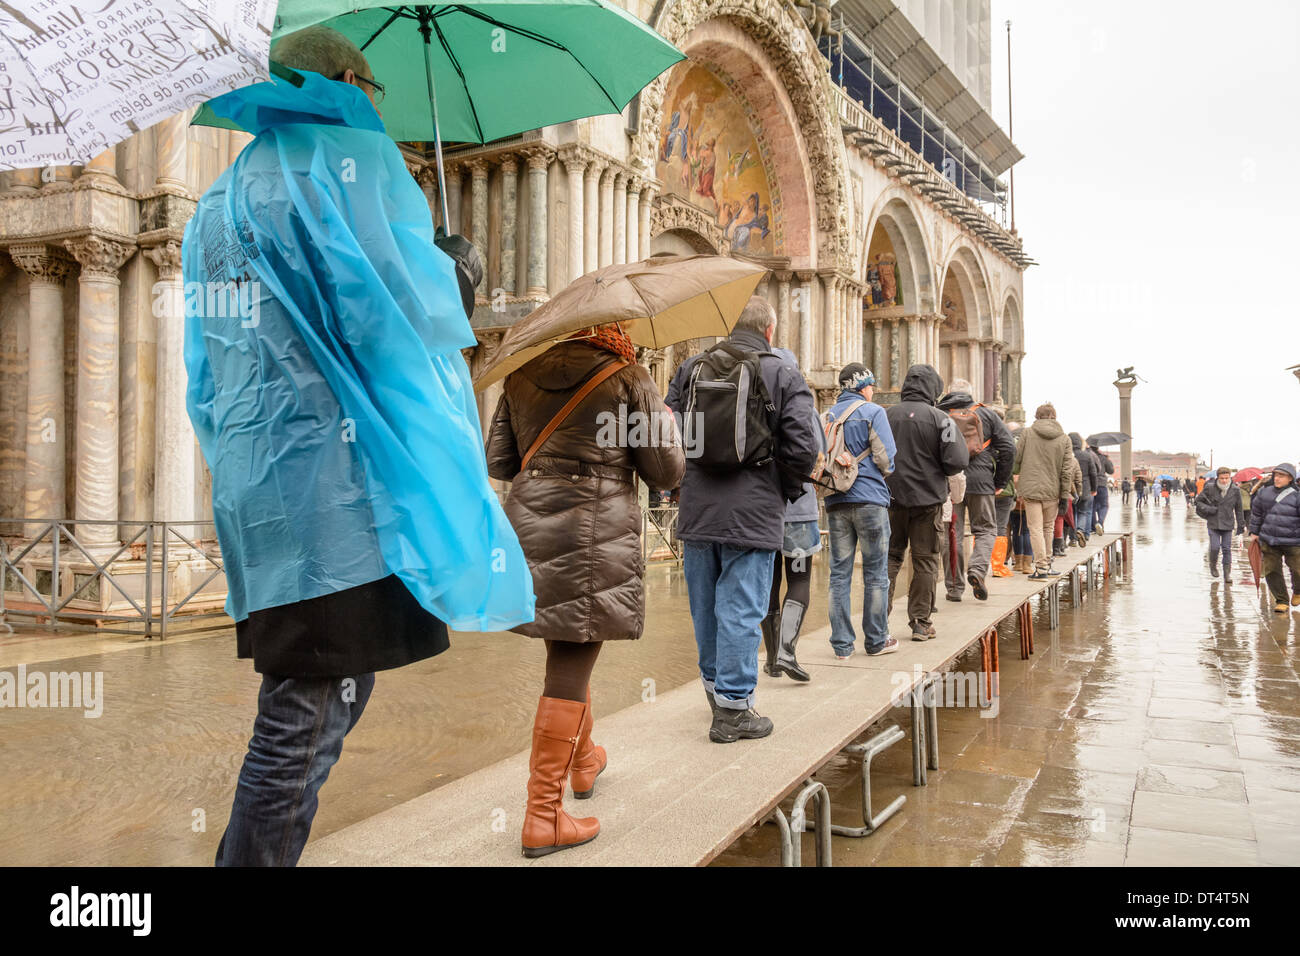 Venice, Italy. Tourists on acqua alta (high water) gangways queuing to enter the San Marco Basilica. Stock Photo